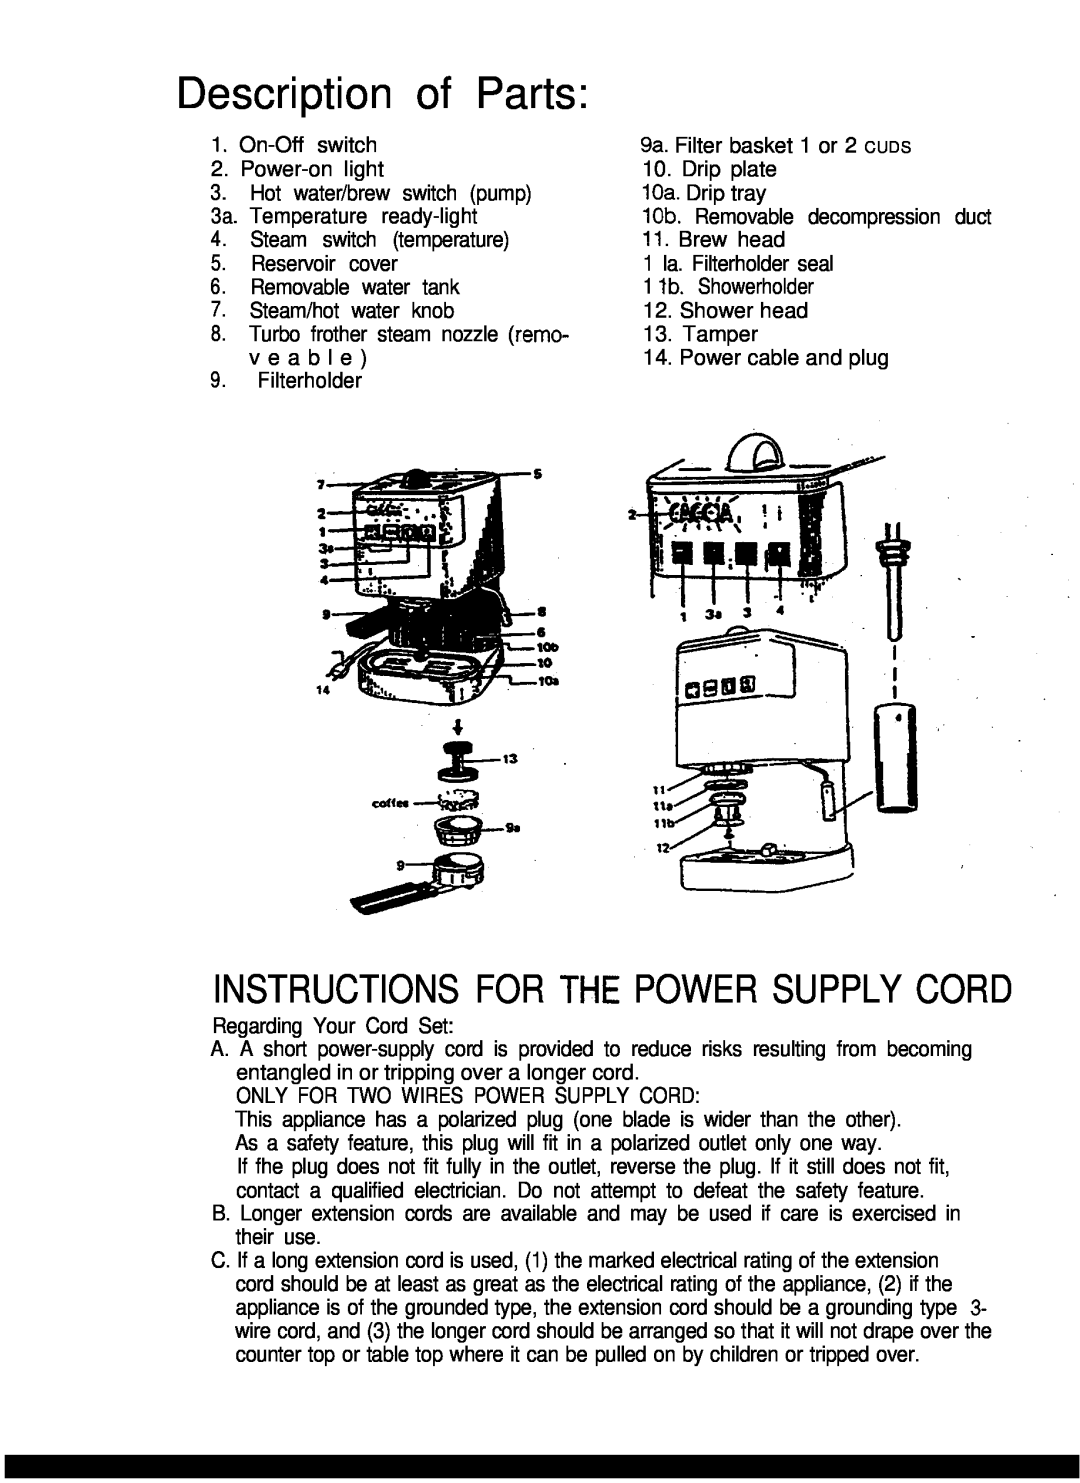 Gaggia Expresso/Cappuccino Makers manual Description, Parts, Instructions For The Power Supply Cord 